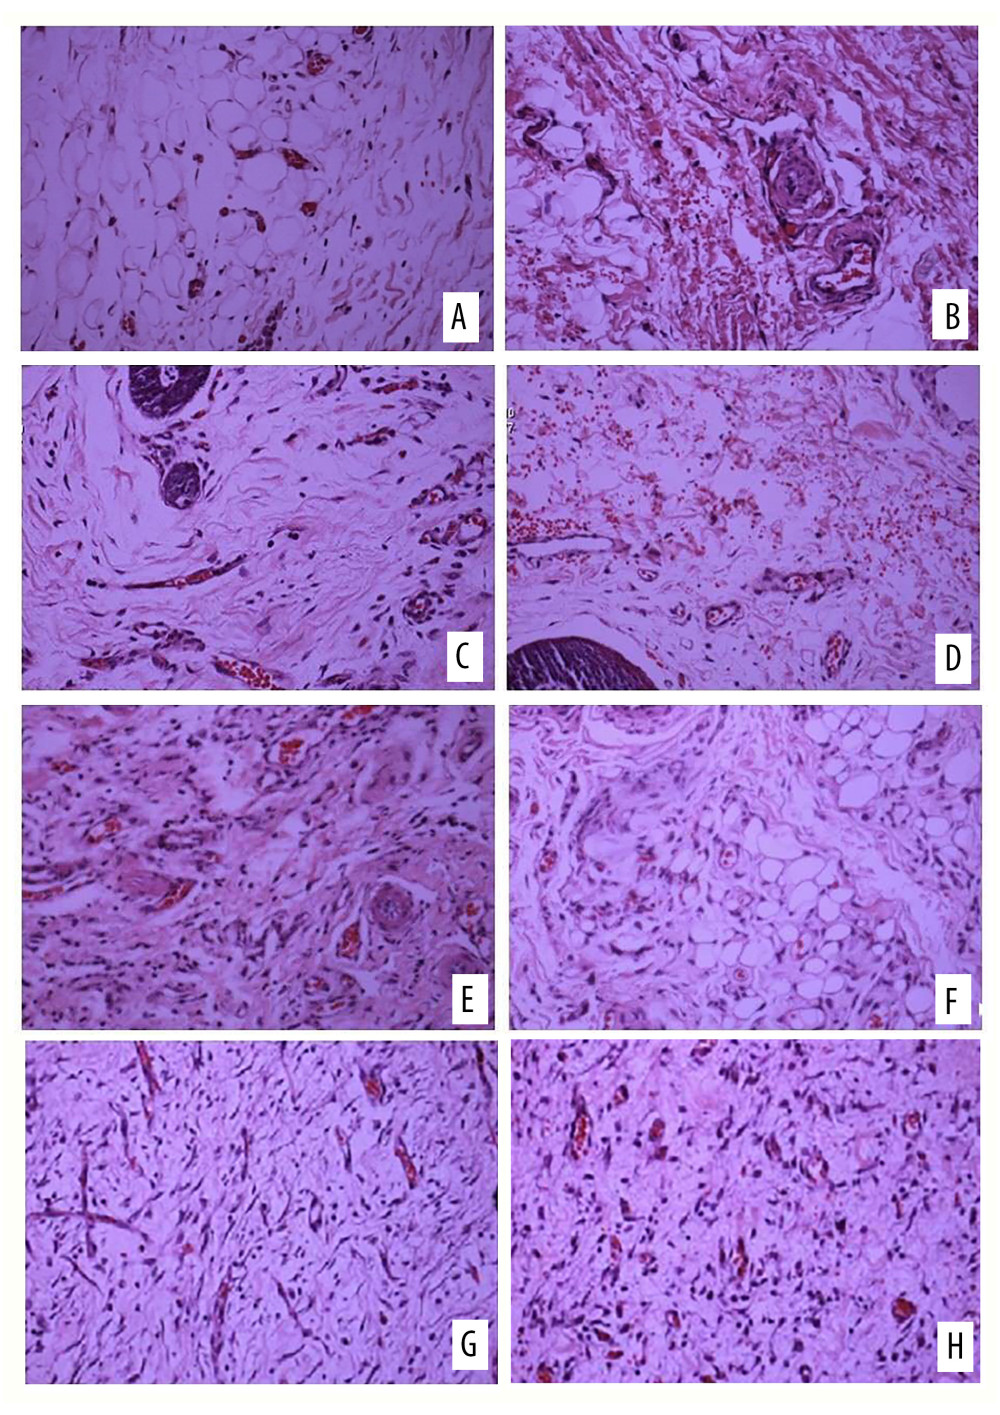 Hematoxylin and eosin (H&E) staining of (A) the experimental side and (B) the control side 7 days after surgery (group A). H&E staining of (C) the experimental side and (D) the control side 14 days after surgery (group B). H&E staining of (E) the experimental side and (F) the control side 7 days after surgery (group C). H&E staining of (G) the experimental side and (H) the control side 14 days after surgery (group D). All magnification is ×200.